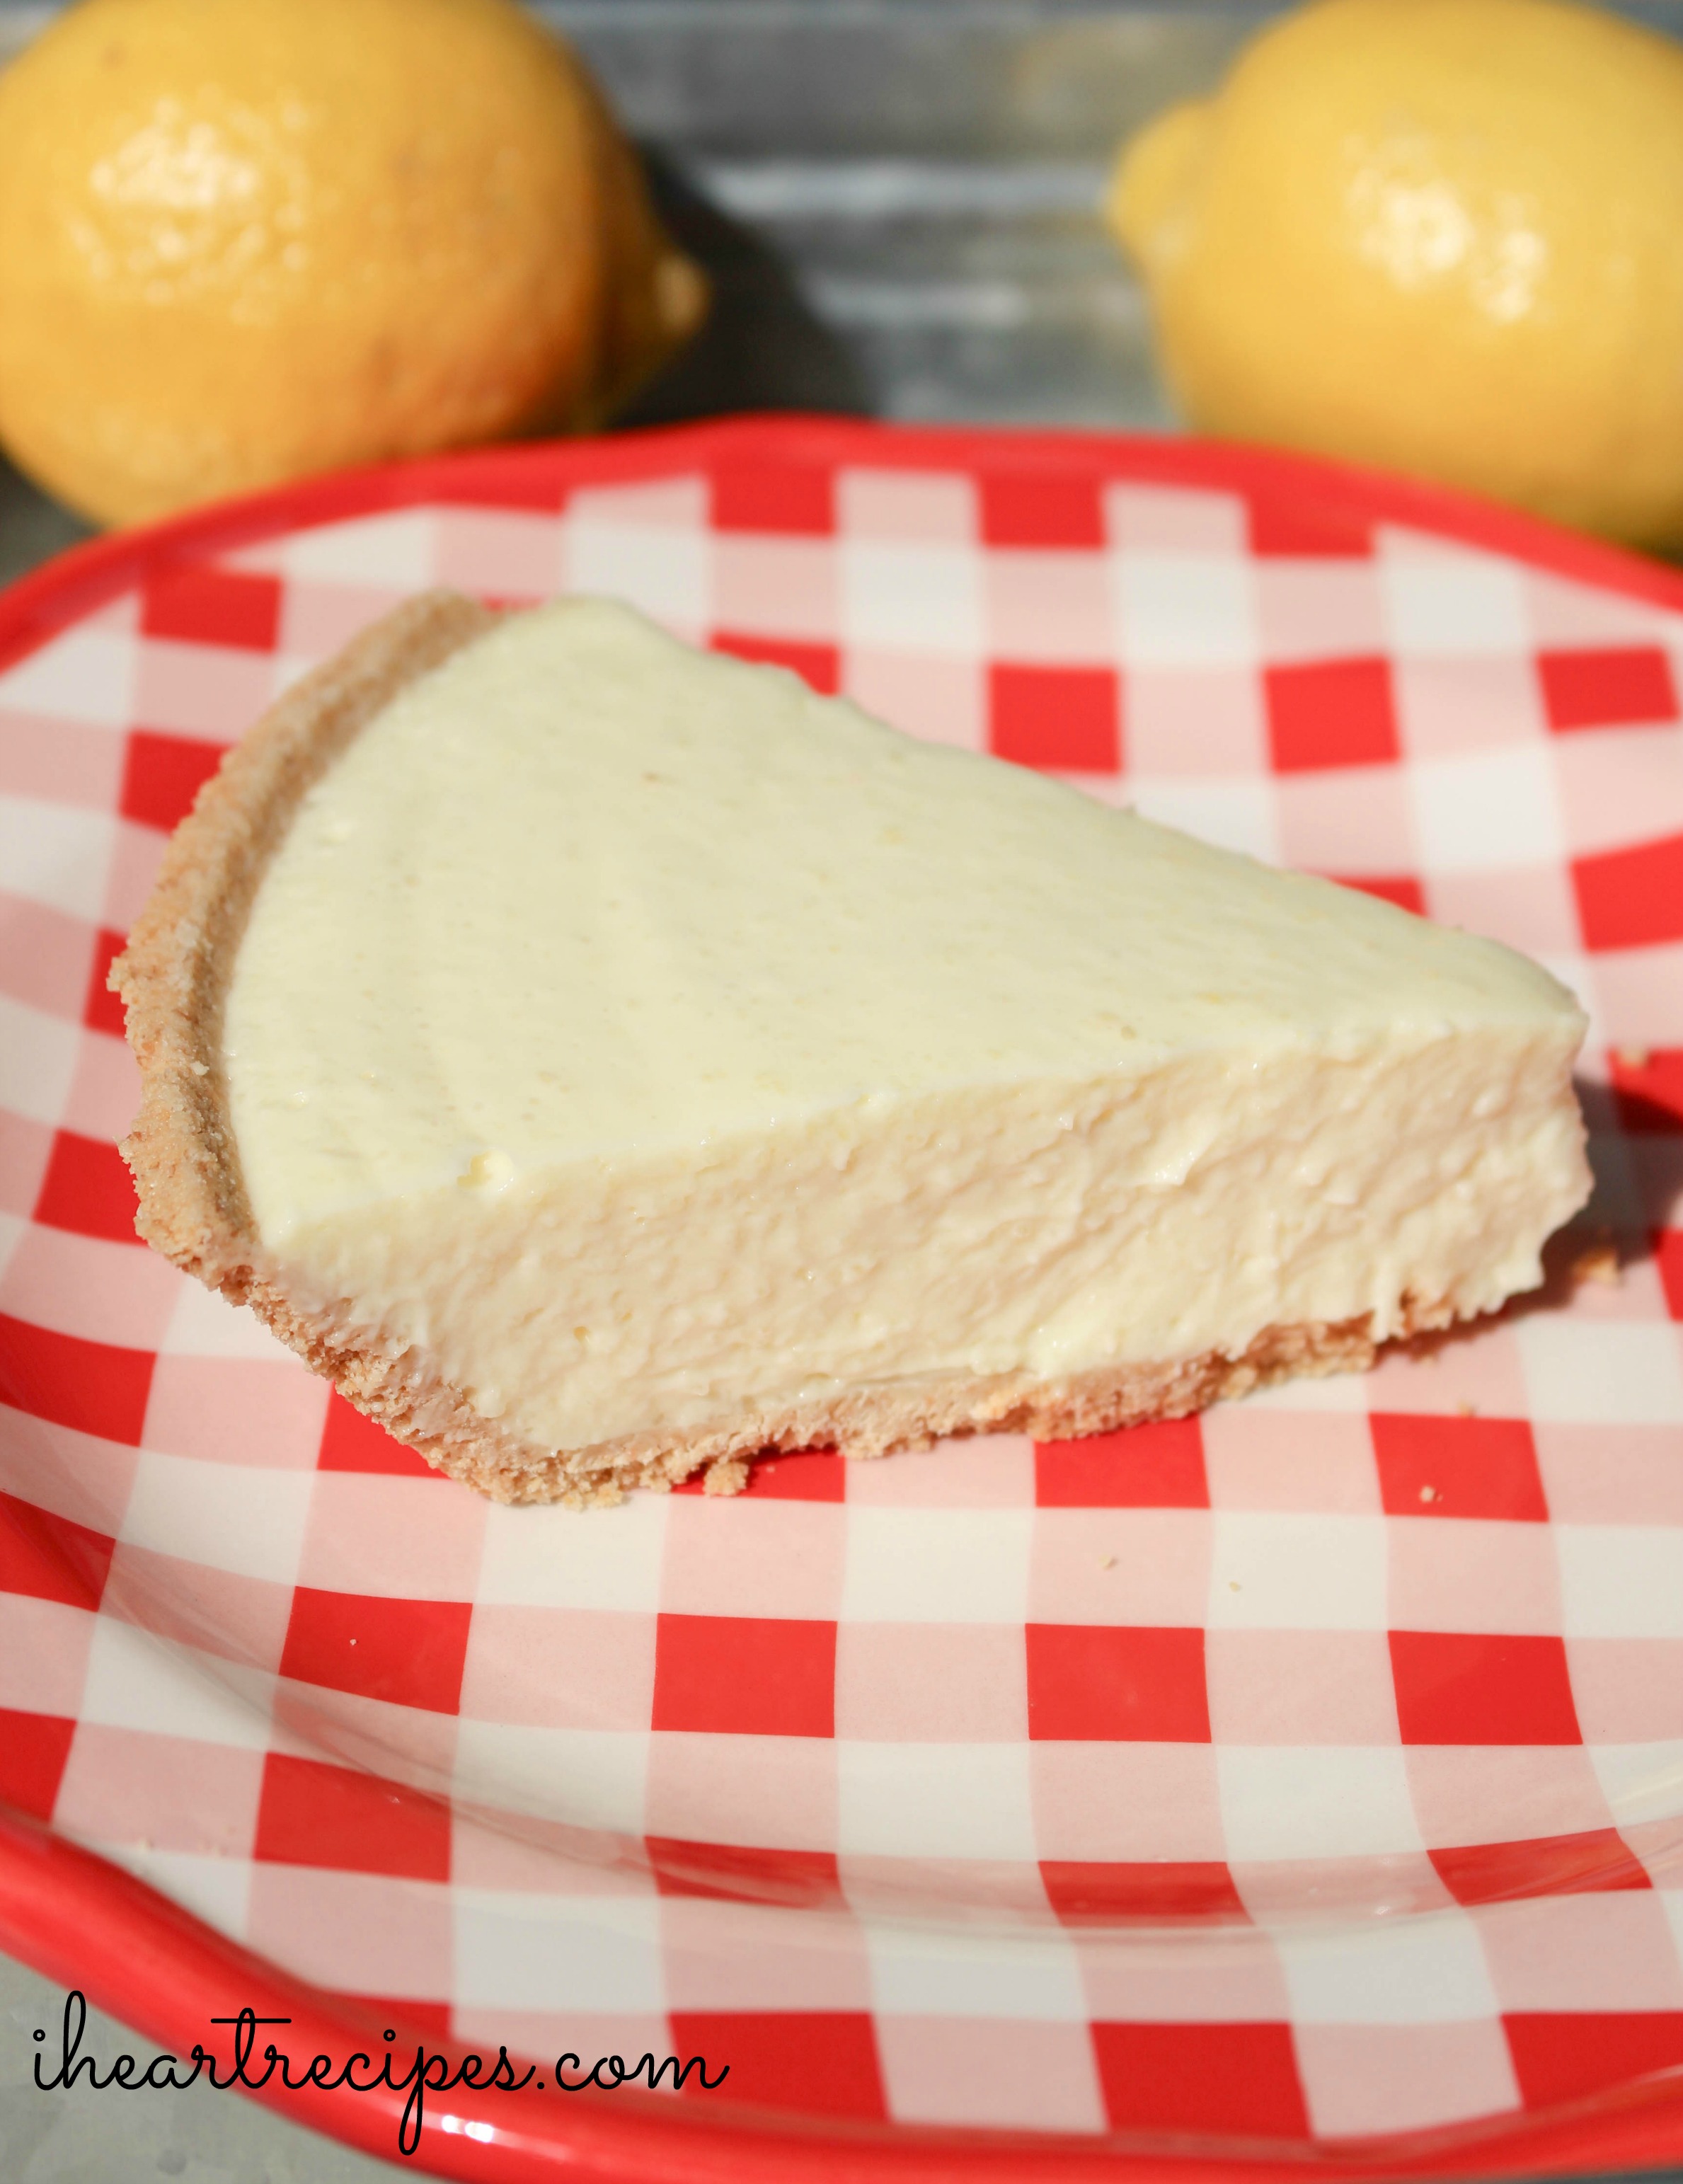 A creamy no-bake lemon cheesecake slice served on a red and white checkered plate just waiting to be enjoyed!